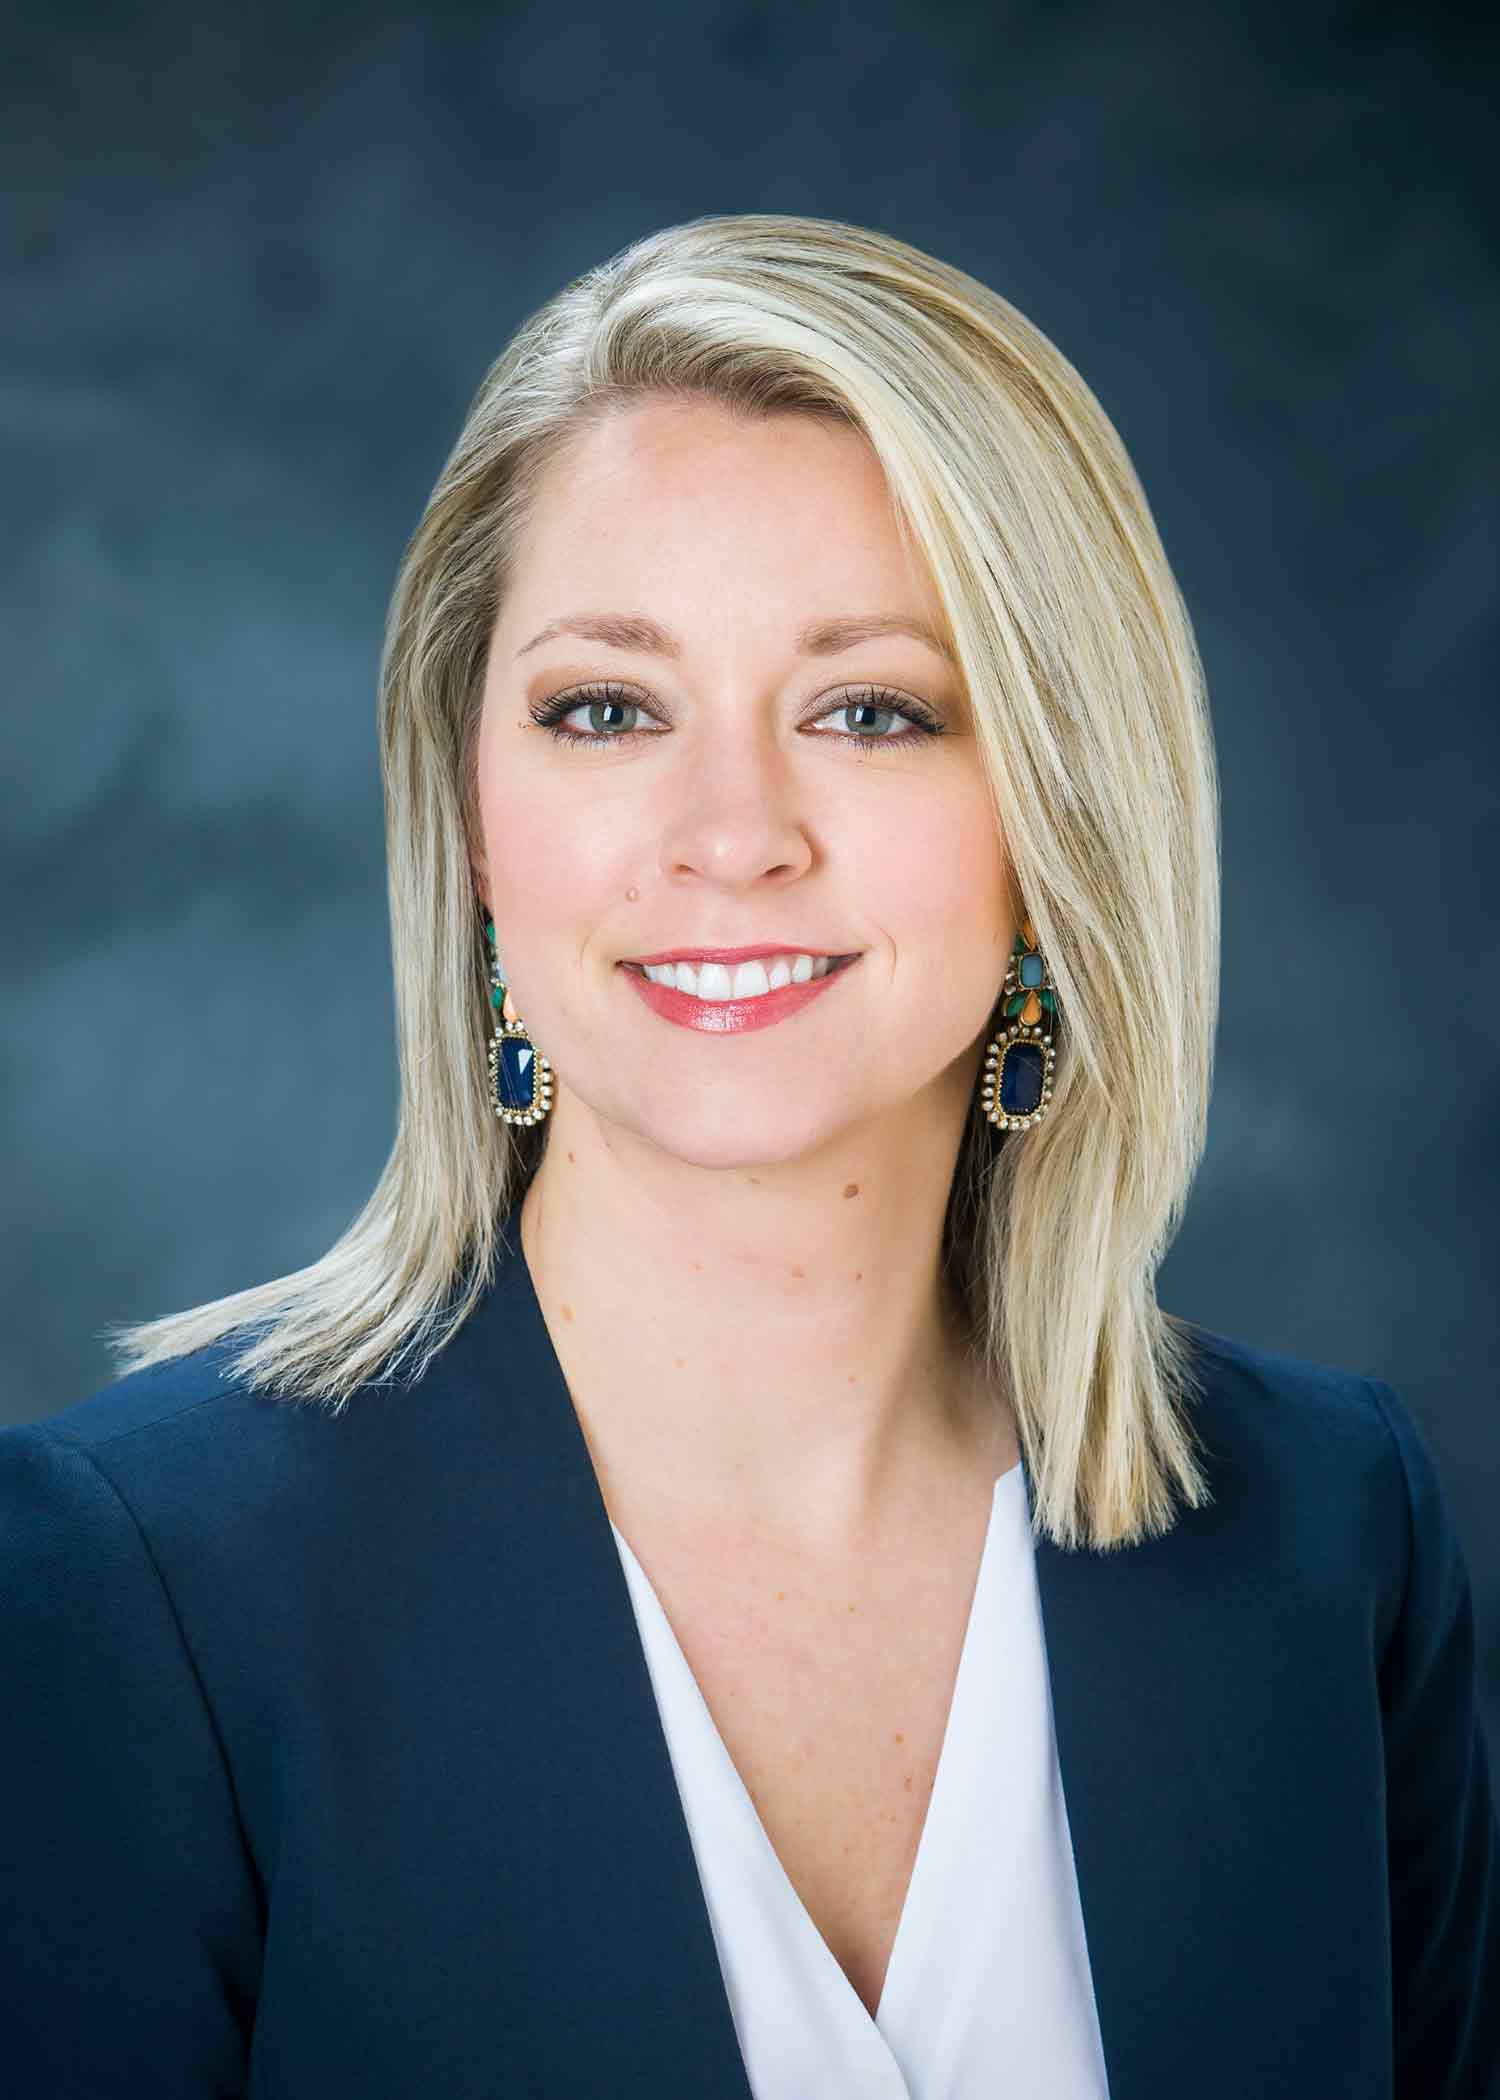 Professional photo of Lindsey Poe, wearing a white blouse and dark blazer against a blue background.